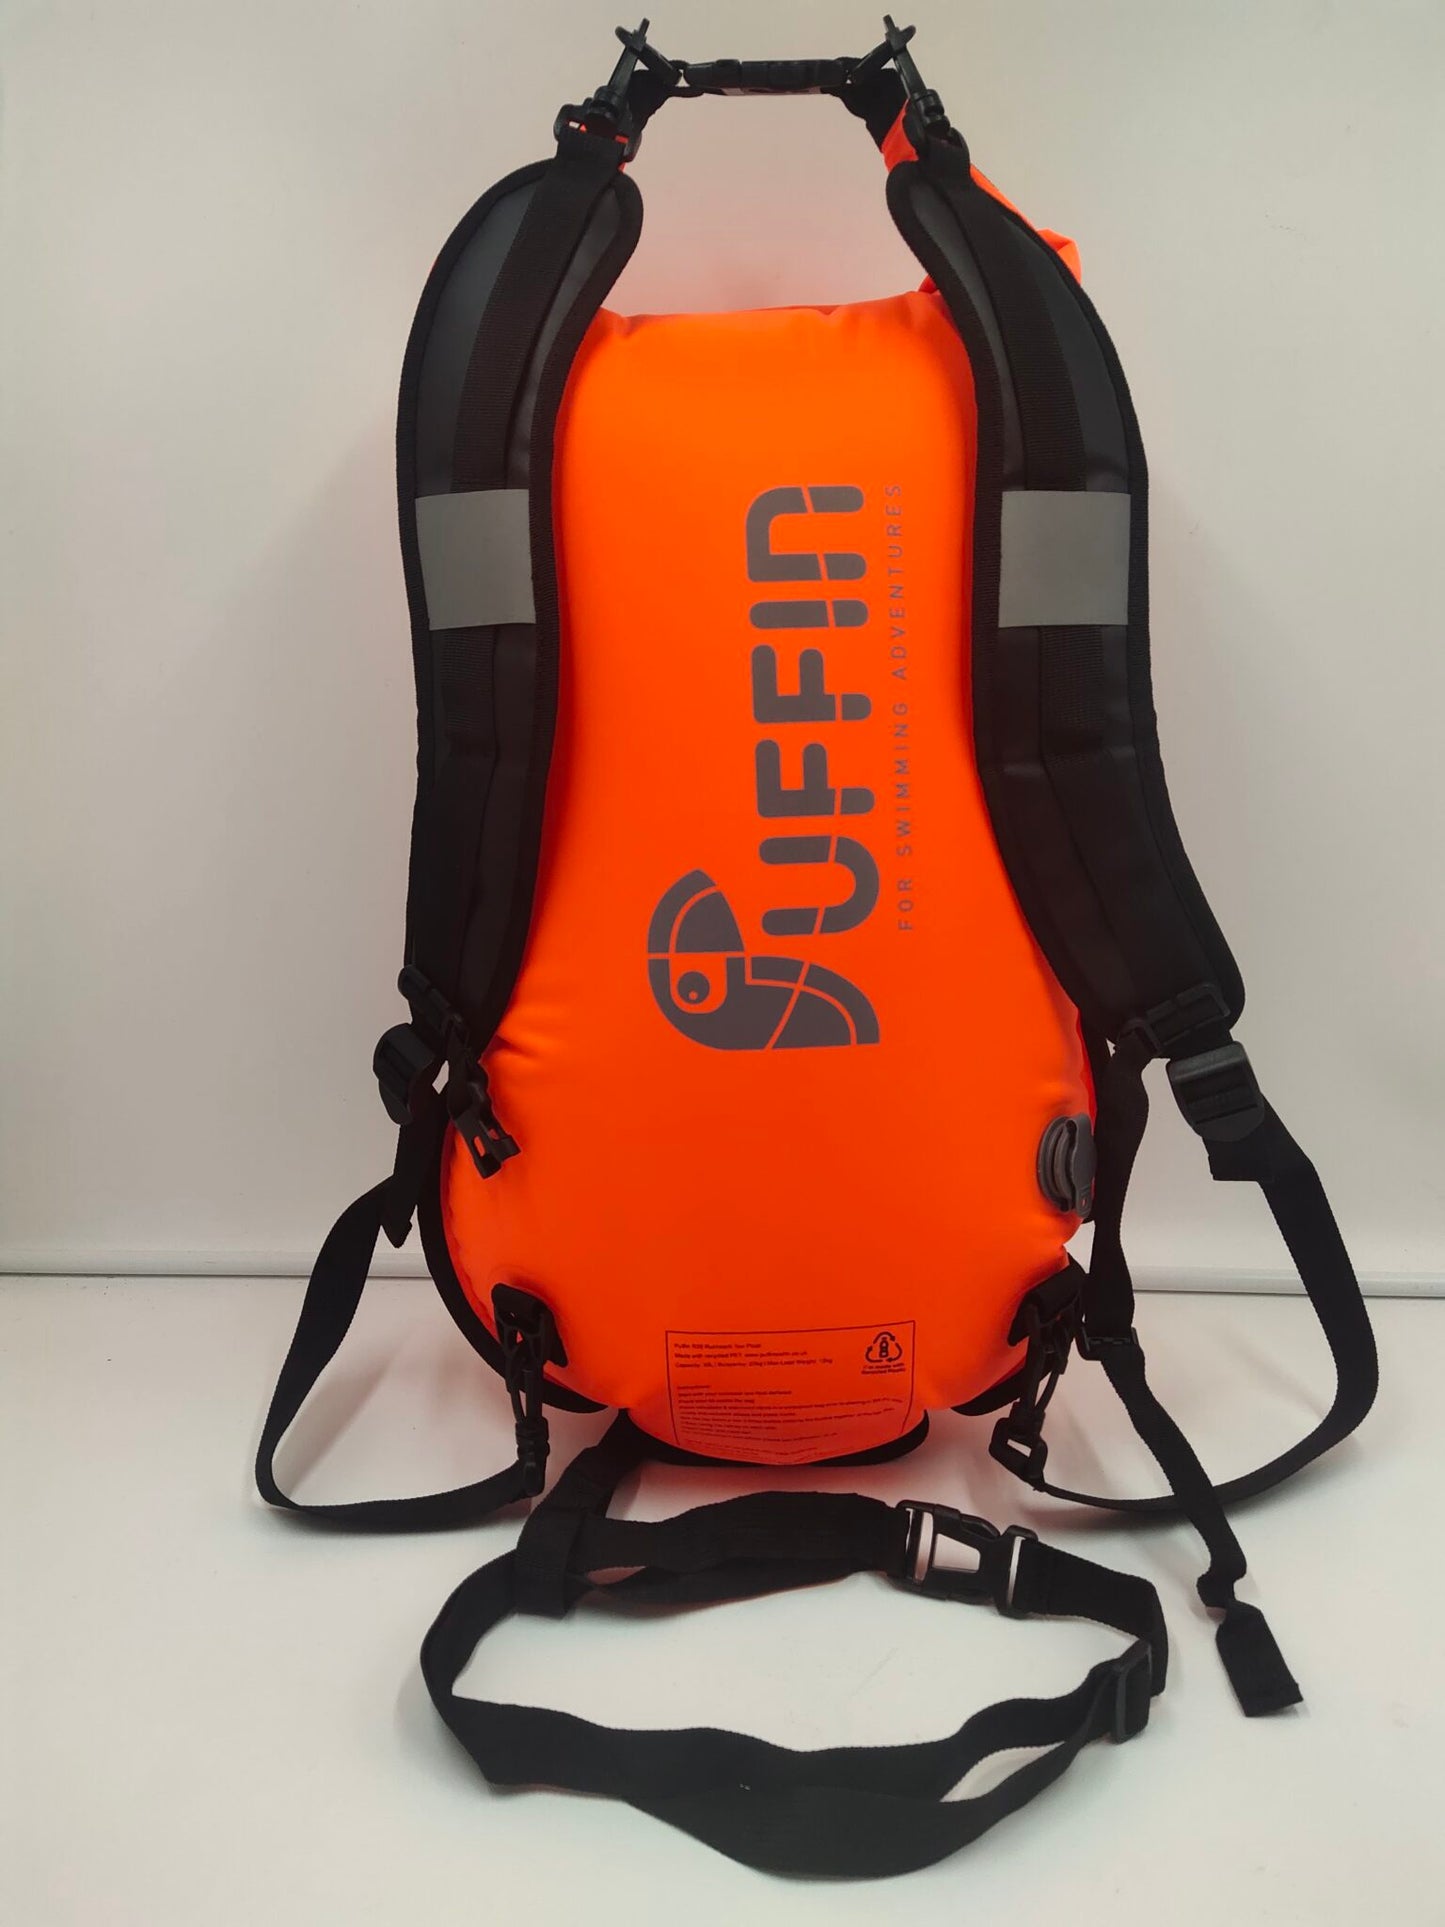 Puffin - 35 Litre Swim/Hike Recycled Tow Float Rucksack